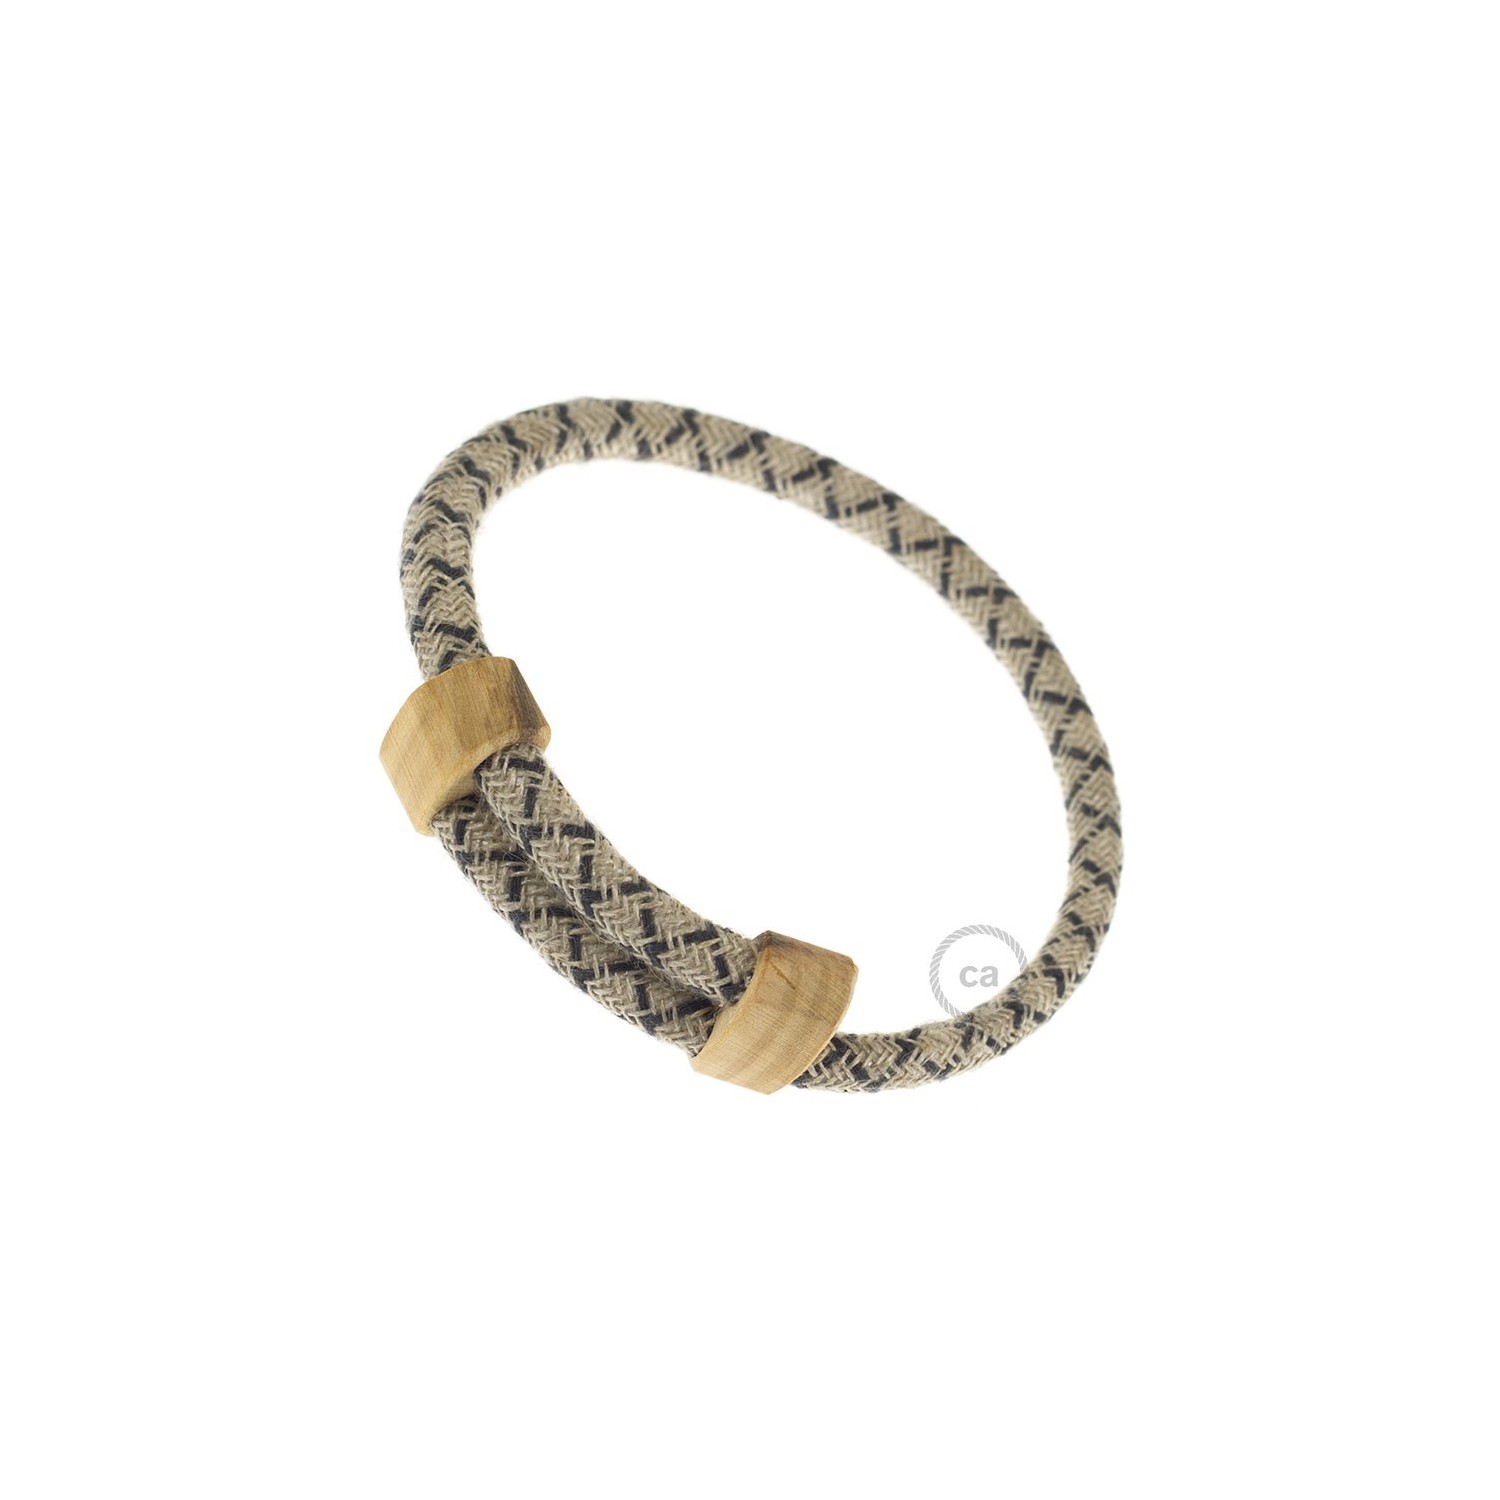 Creative-Bracelet in Anthracite Lozanga Cotton and Natural Linen RD64. Wood sliding fastening. Made in Italy.